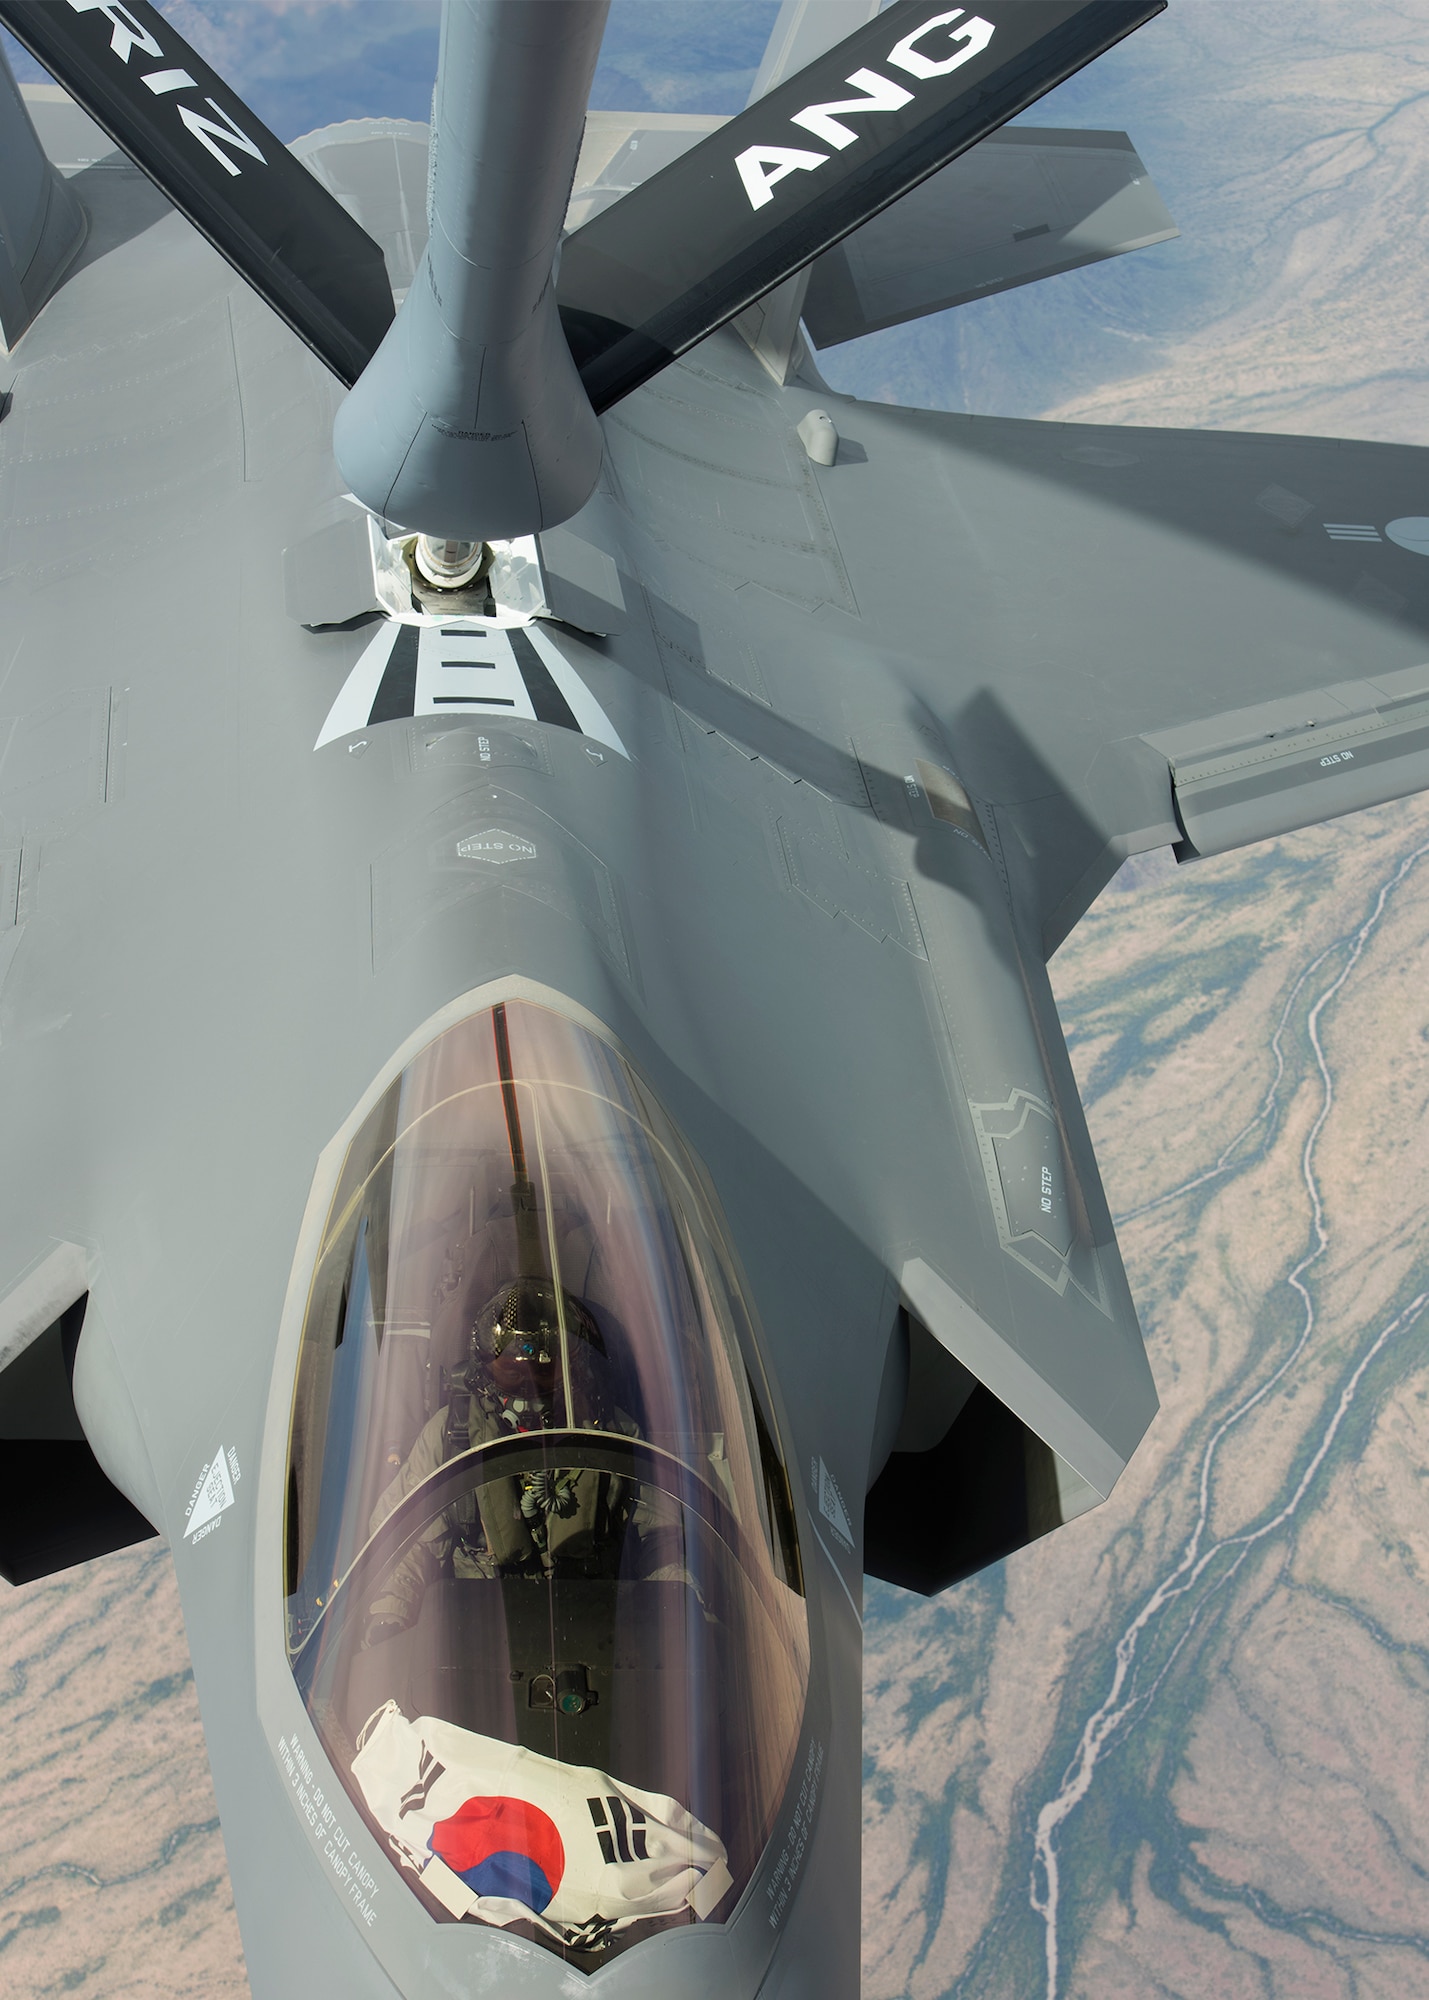 A Republic of Korea Air Force, F-35A Lightning II is refueled while on a flying mission March 15, 2019, in Ariz. South Korea is one of multiple nations partnered with the U.S. to train F-35 pilots. (U.S. Air Force photo by Airman 1st Class Leala Marquez)